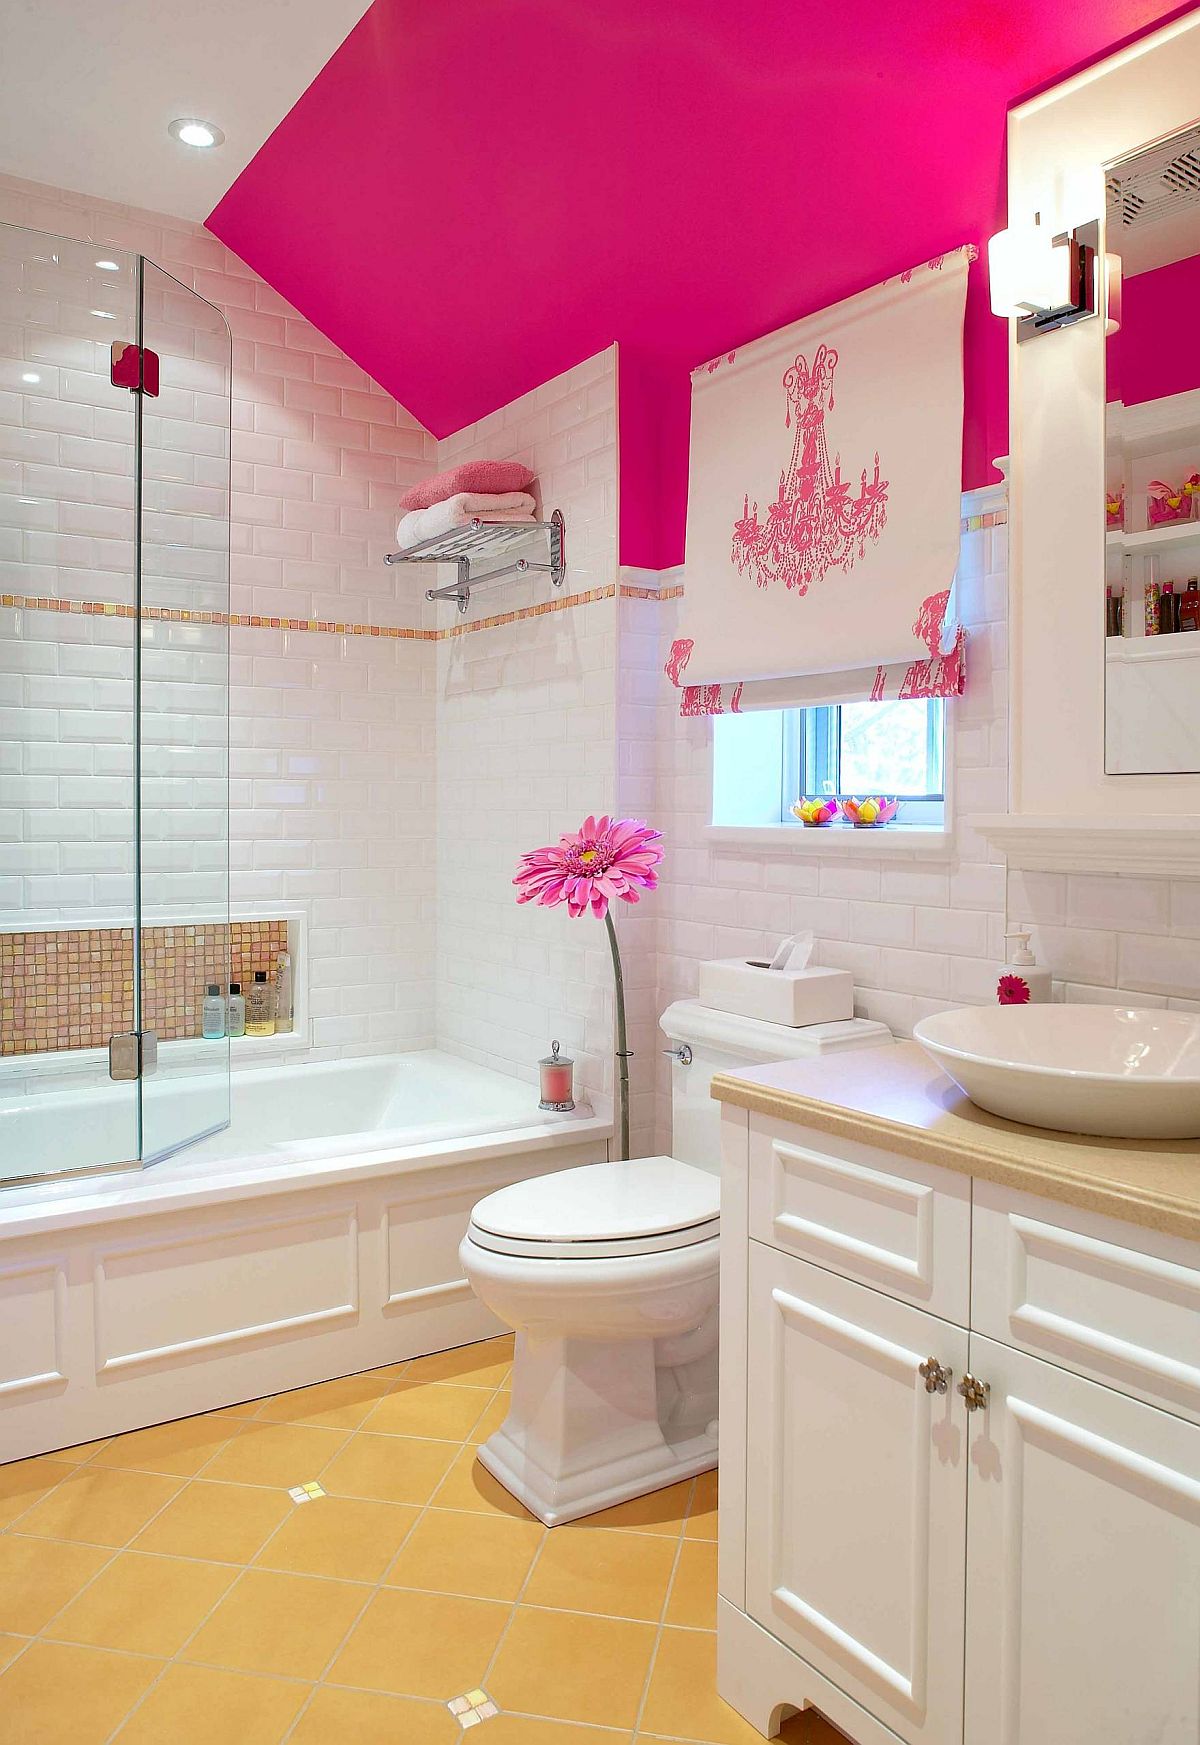 Little pops of pink accentuate it presence in this lovely modern white bathroom